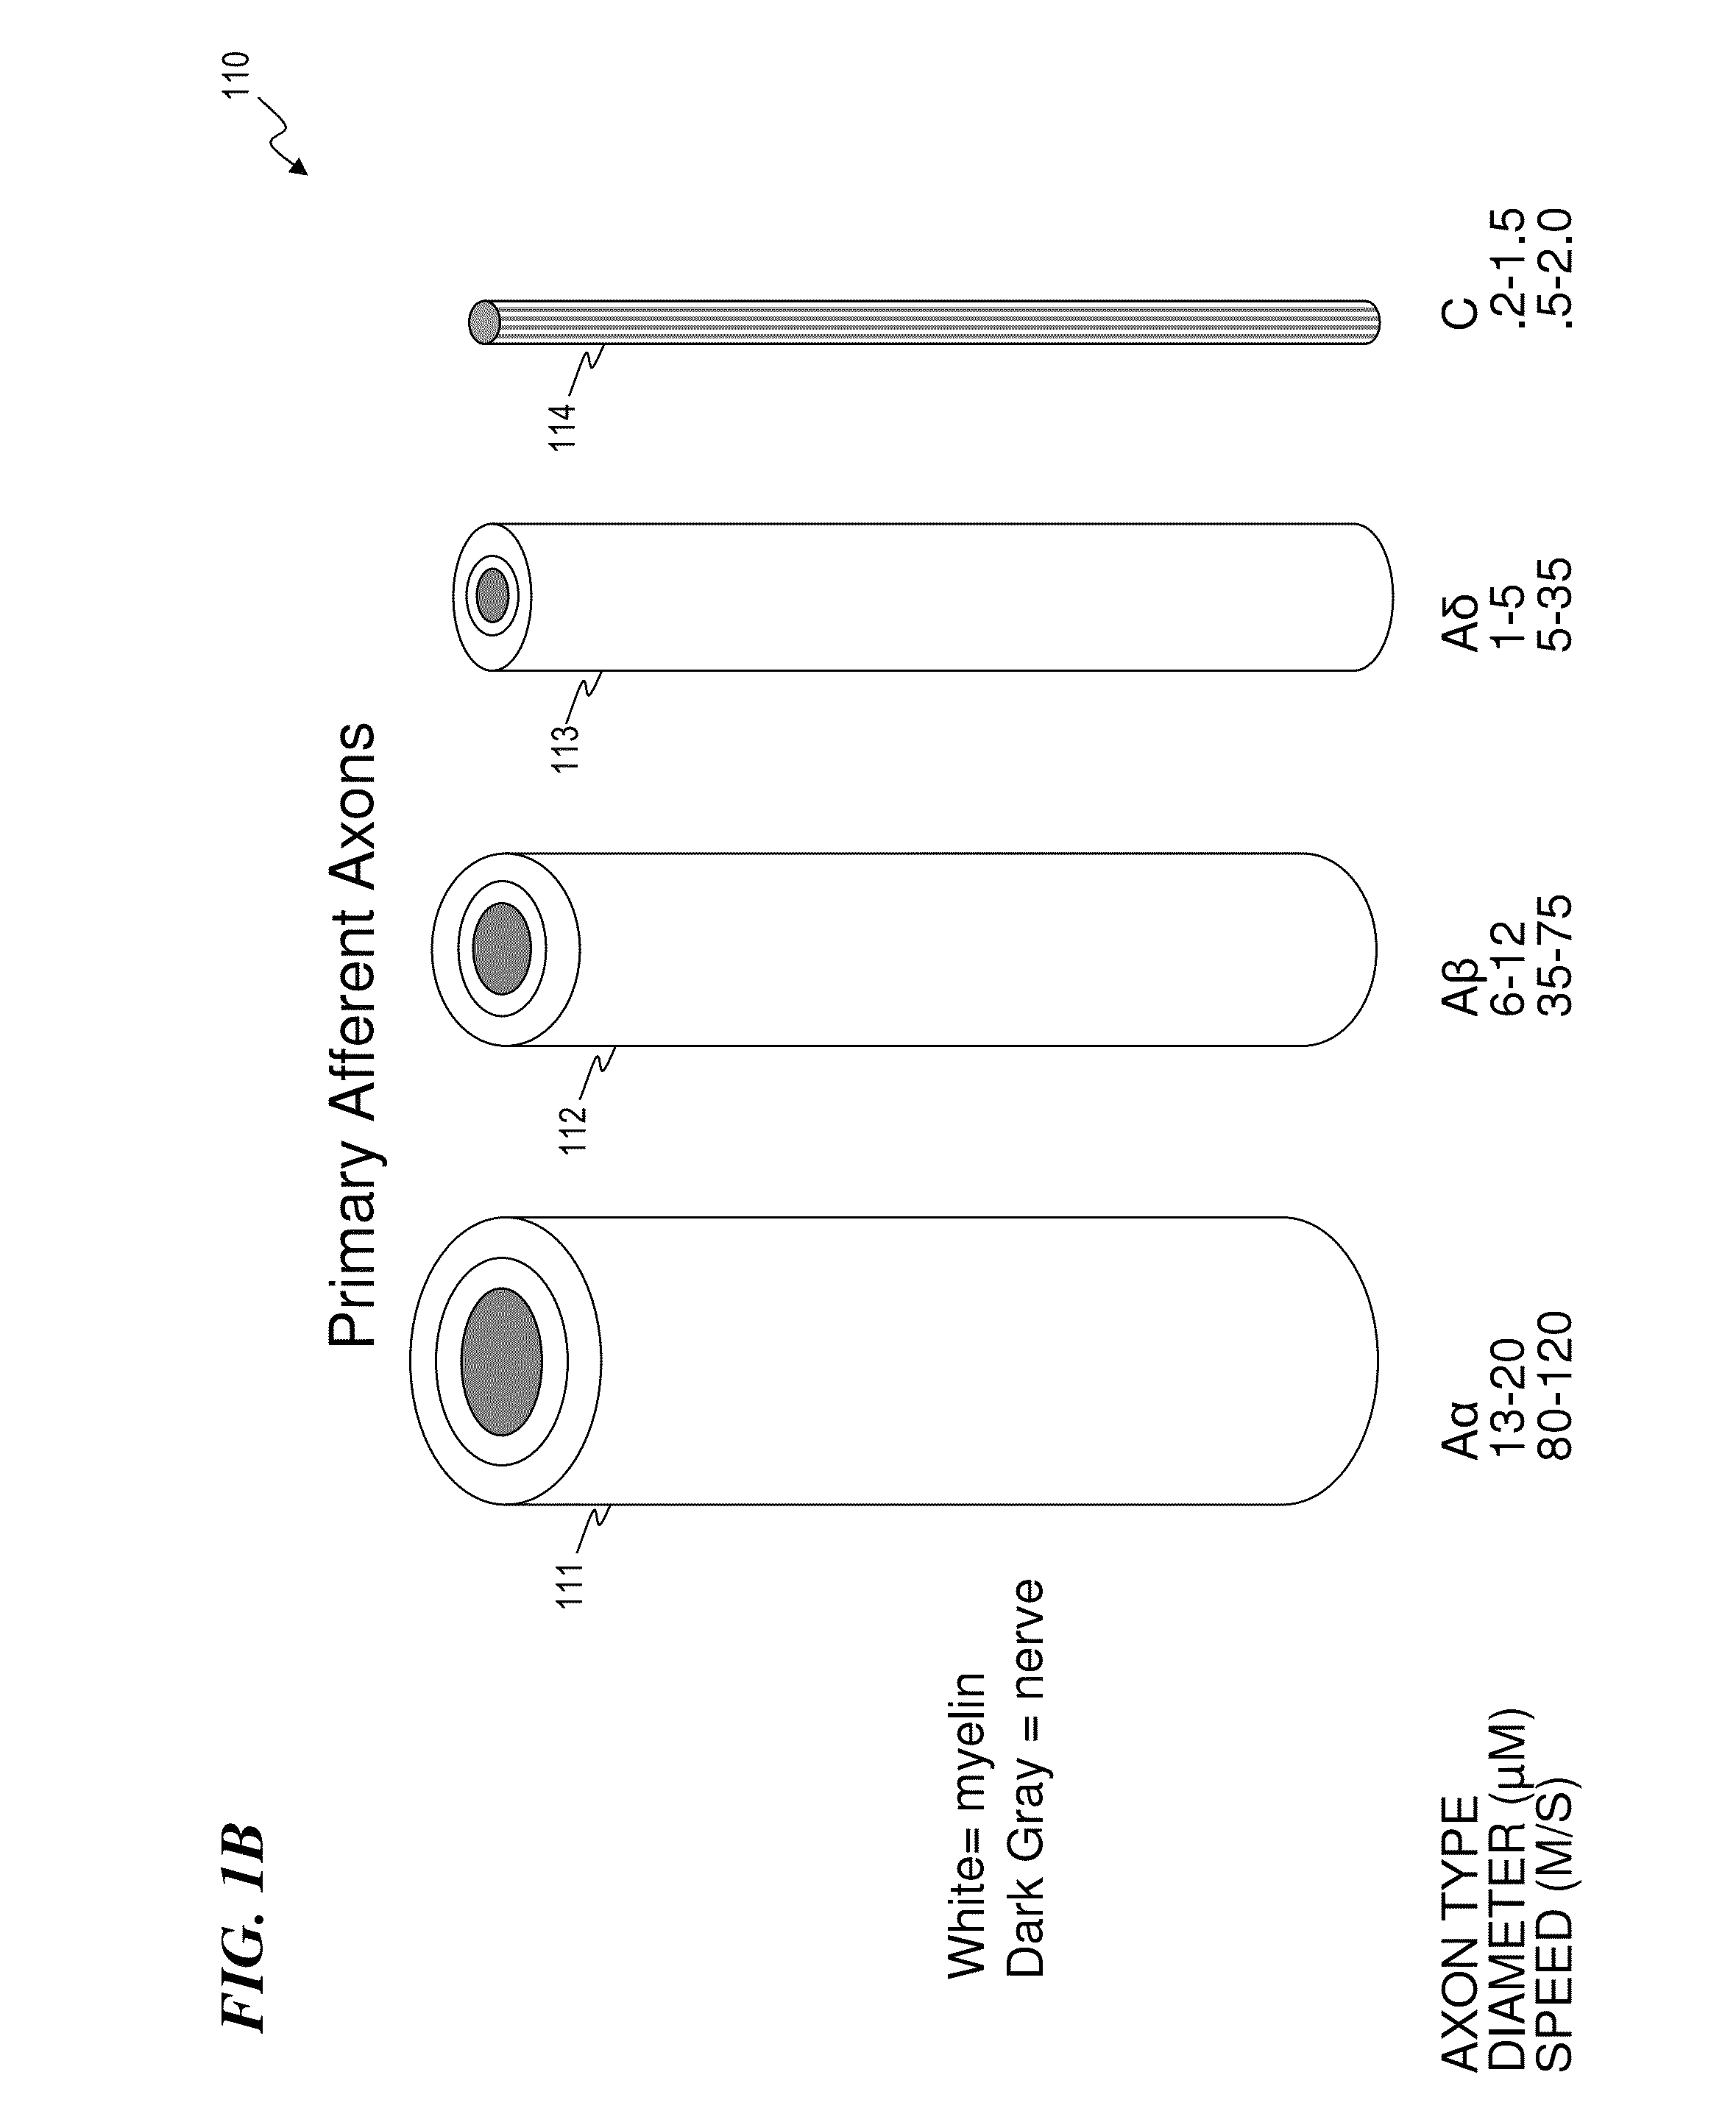 Apparatus and method for managing chronic pain with infrared and low-level light sources